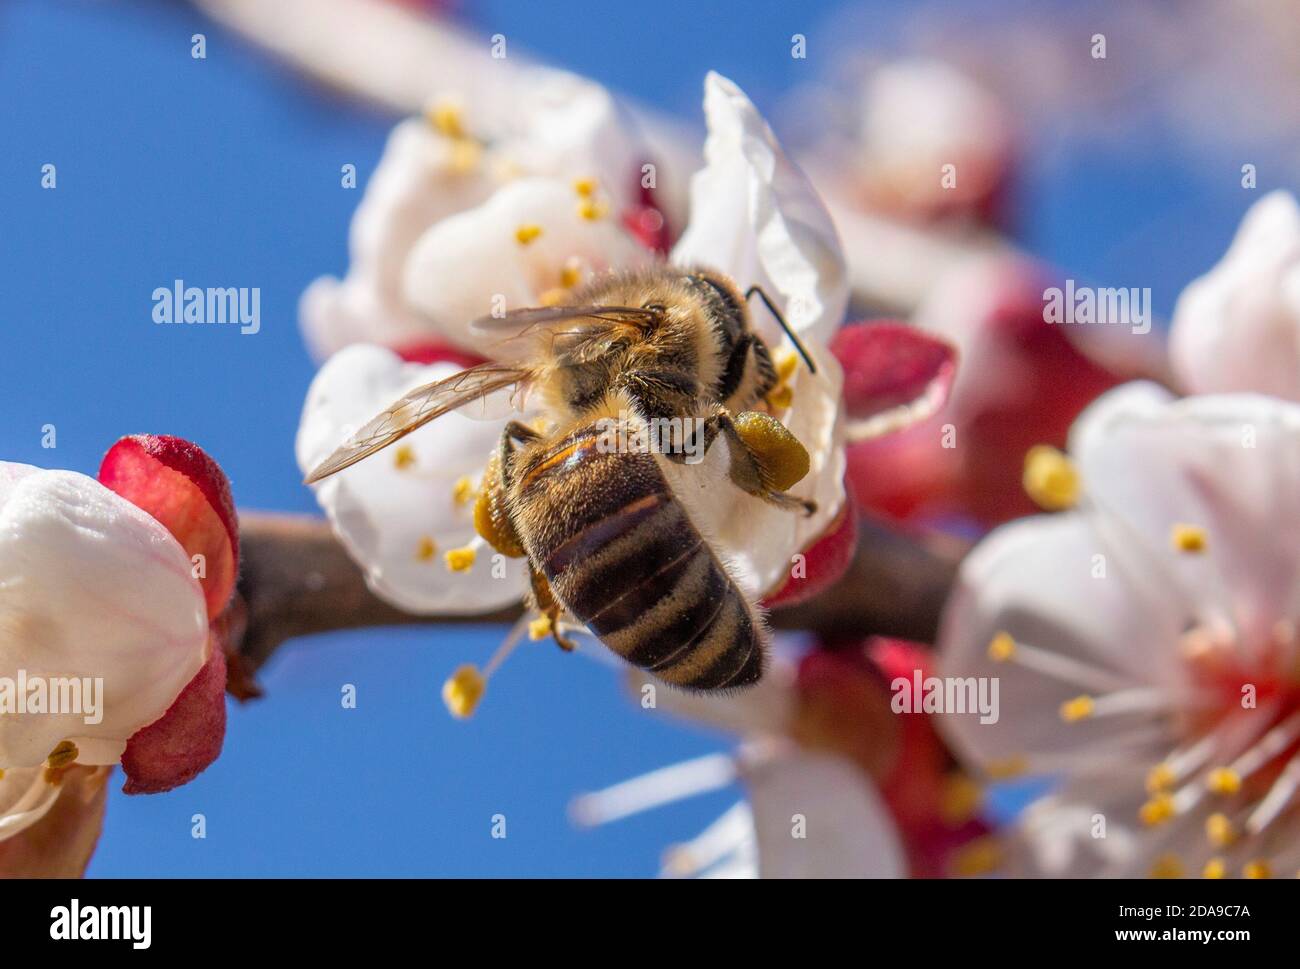 A bee that collects pollen on the paws of the flowers of fruit trees, closeup insects pollinate apricot blossom. Stock Photo